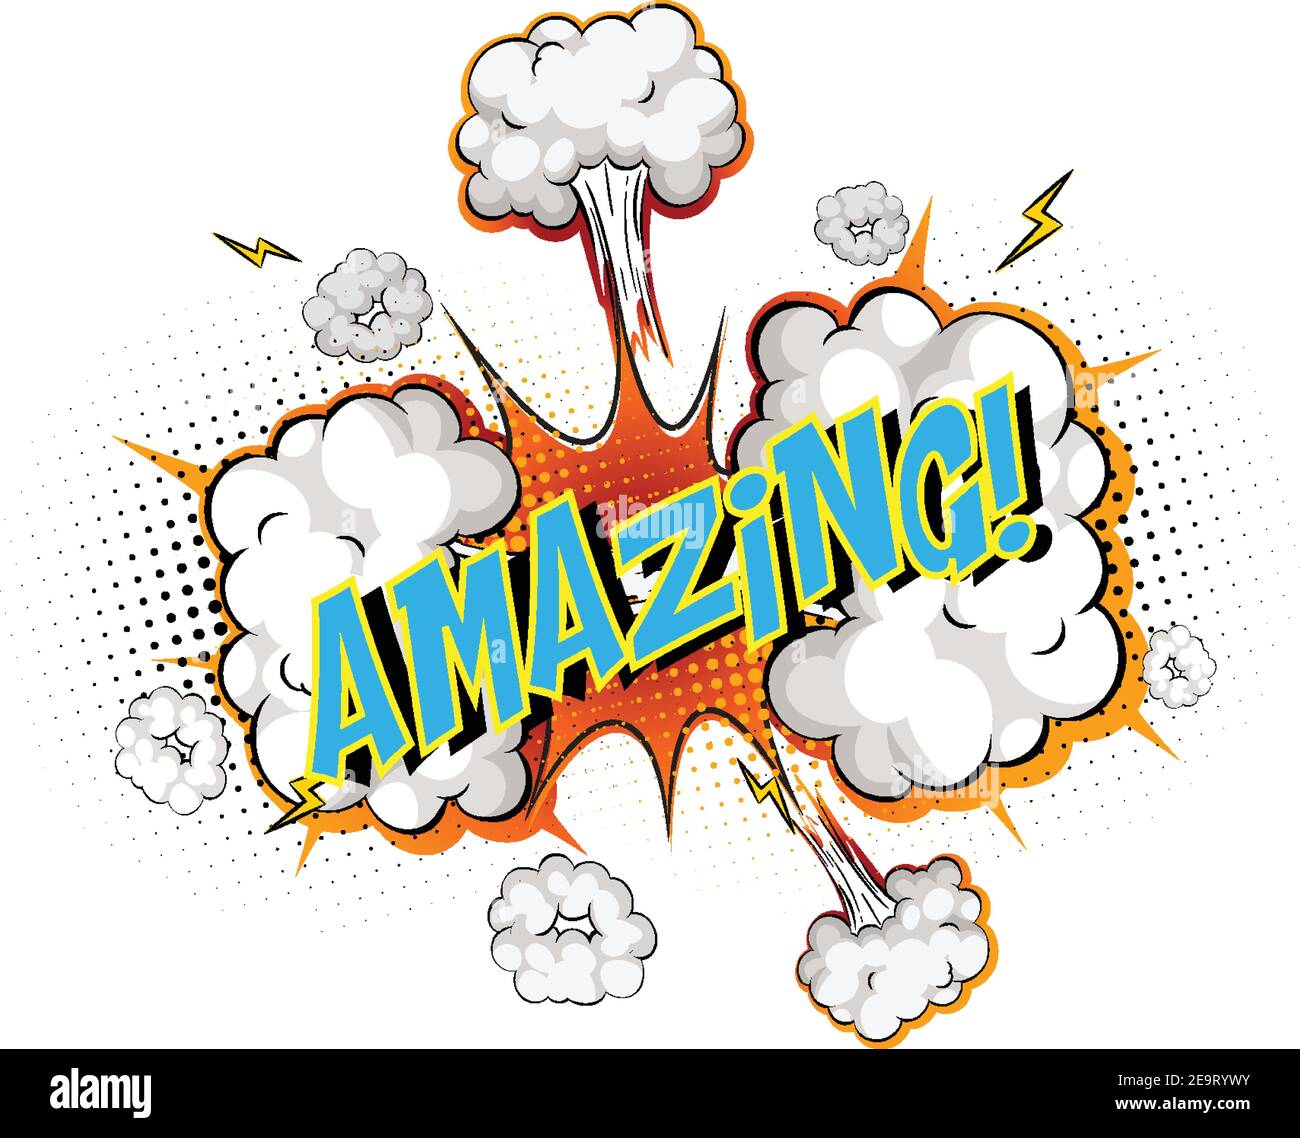 Word Amazing on comic cloud explosion background illustration Stock Vector